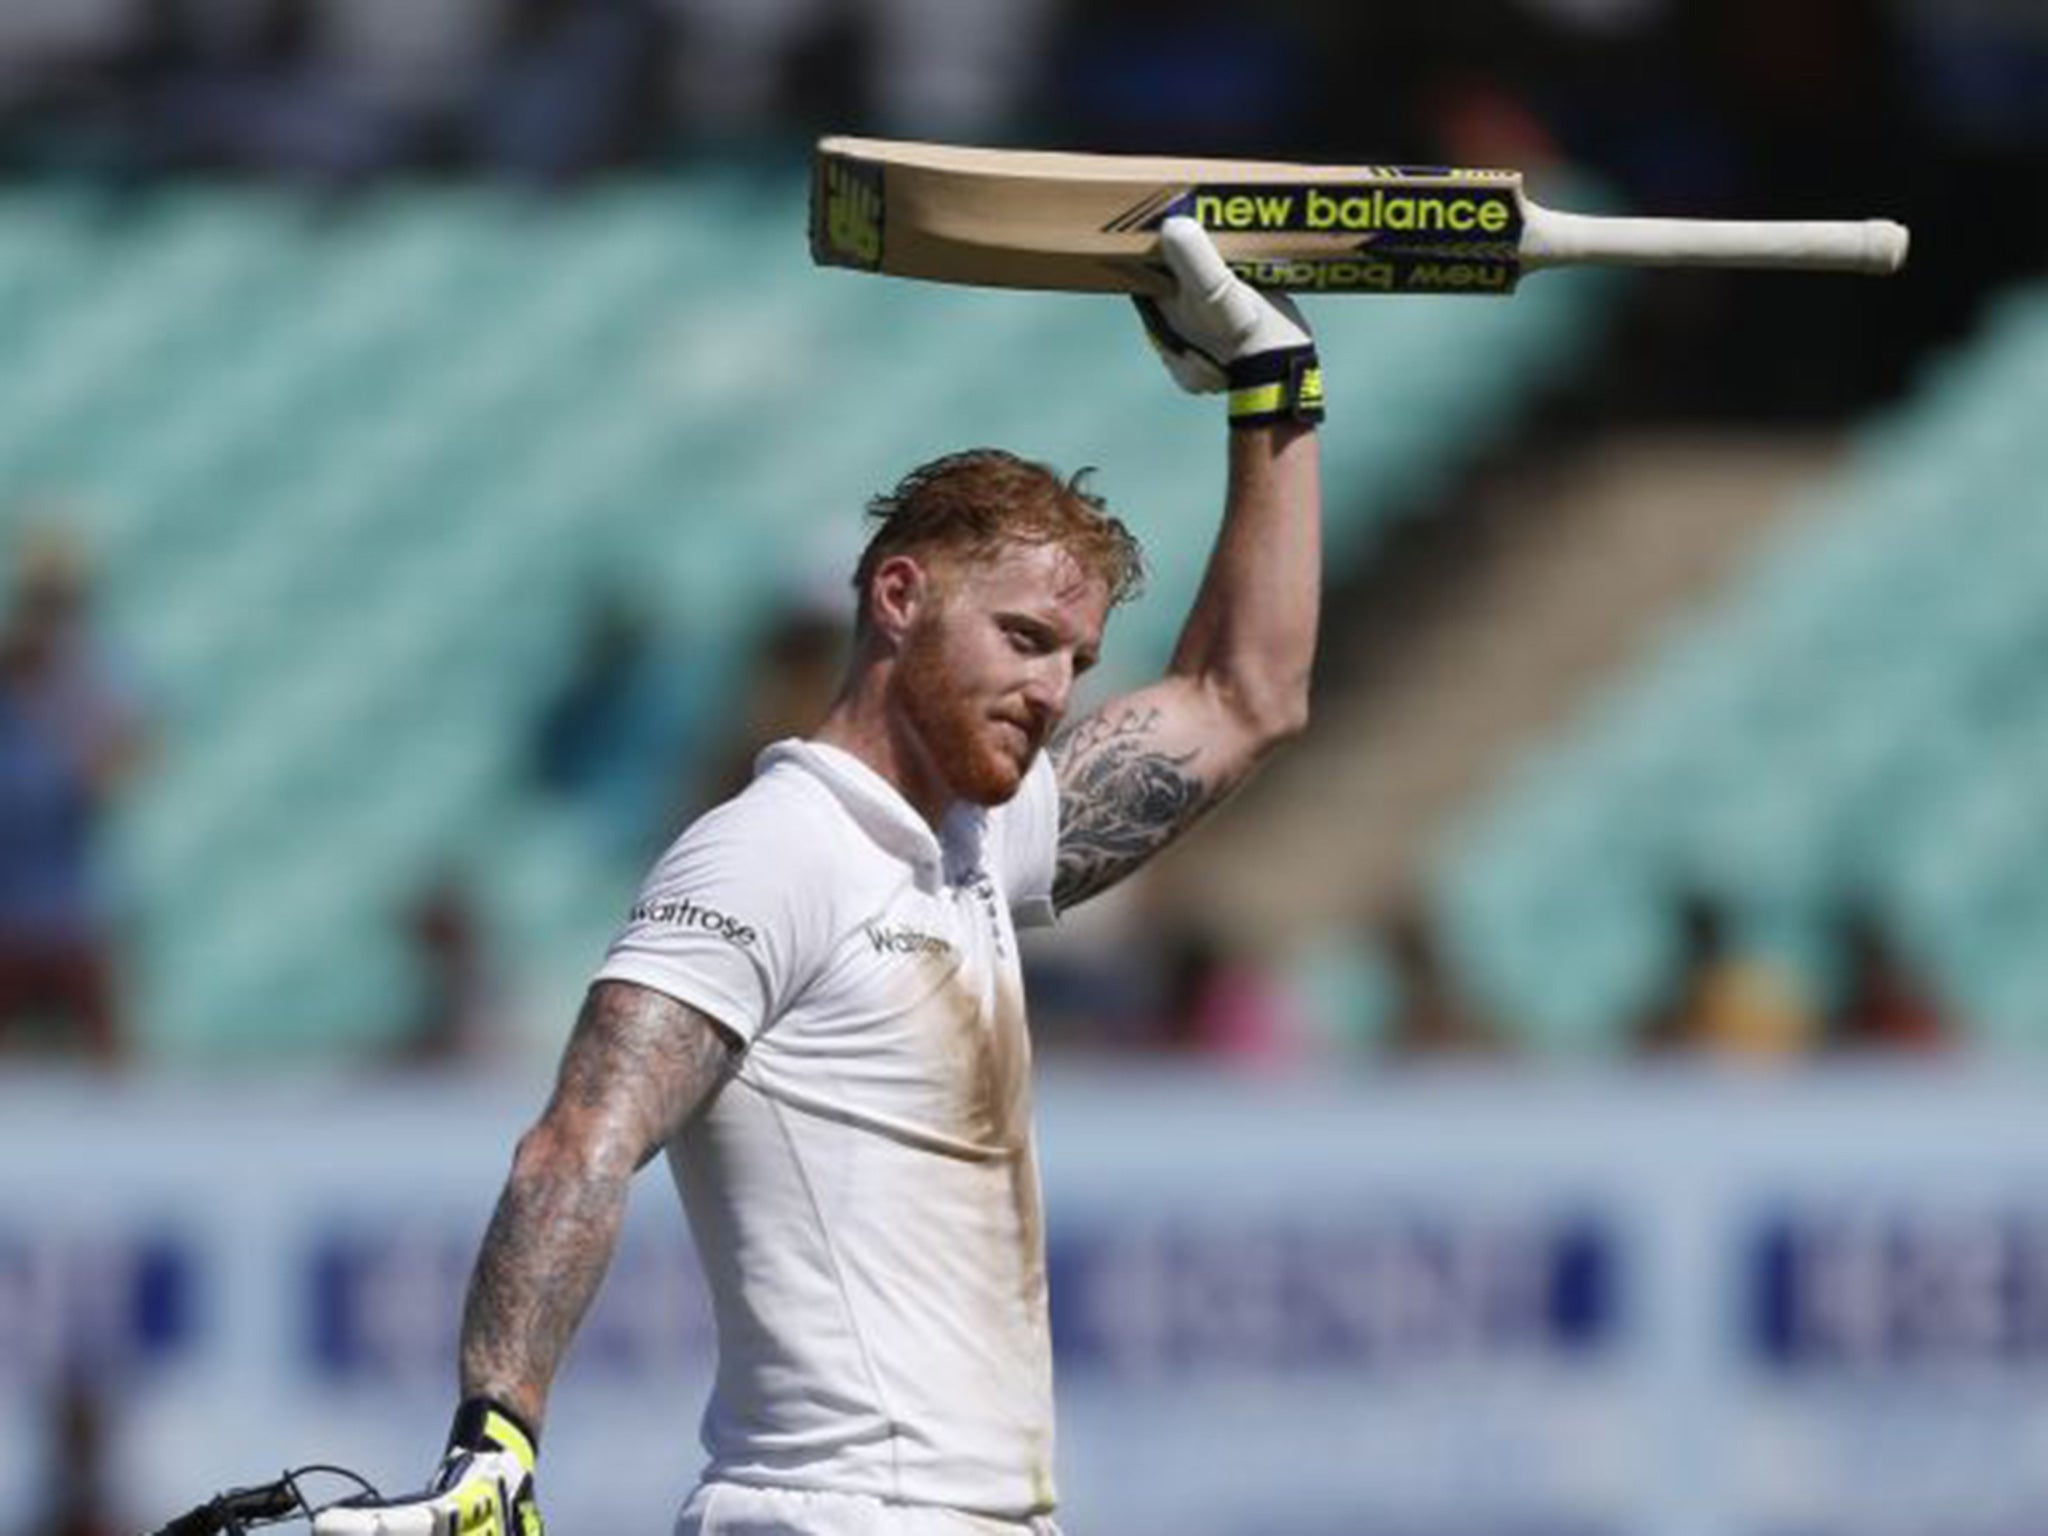 Stokes hit 13 fours and two sixes in his 235-ball 128